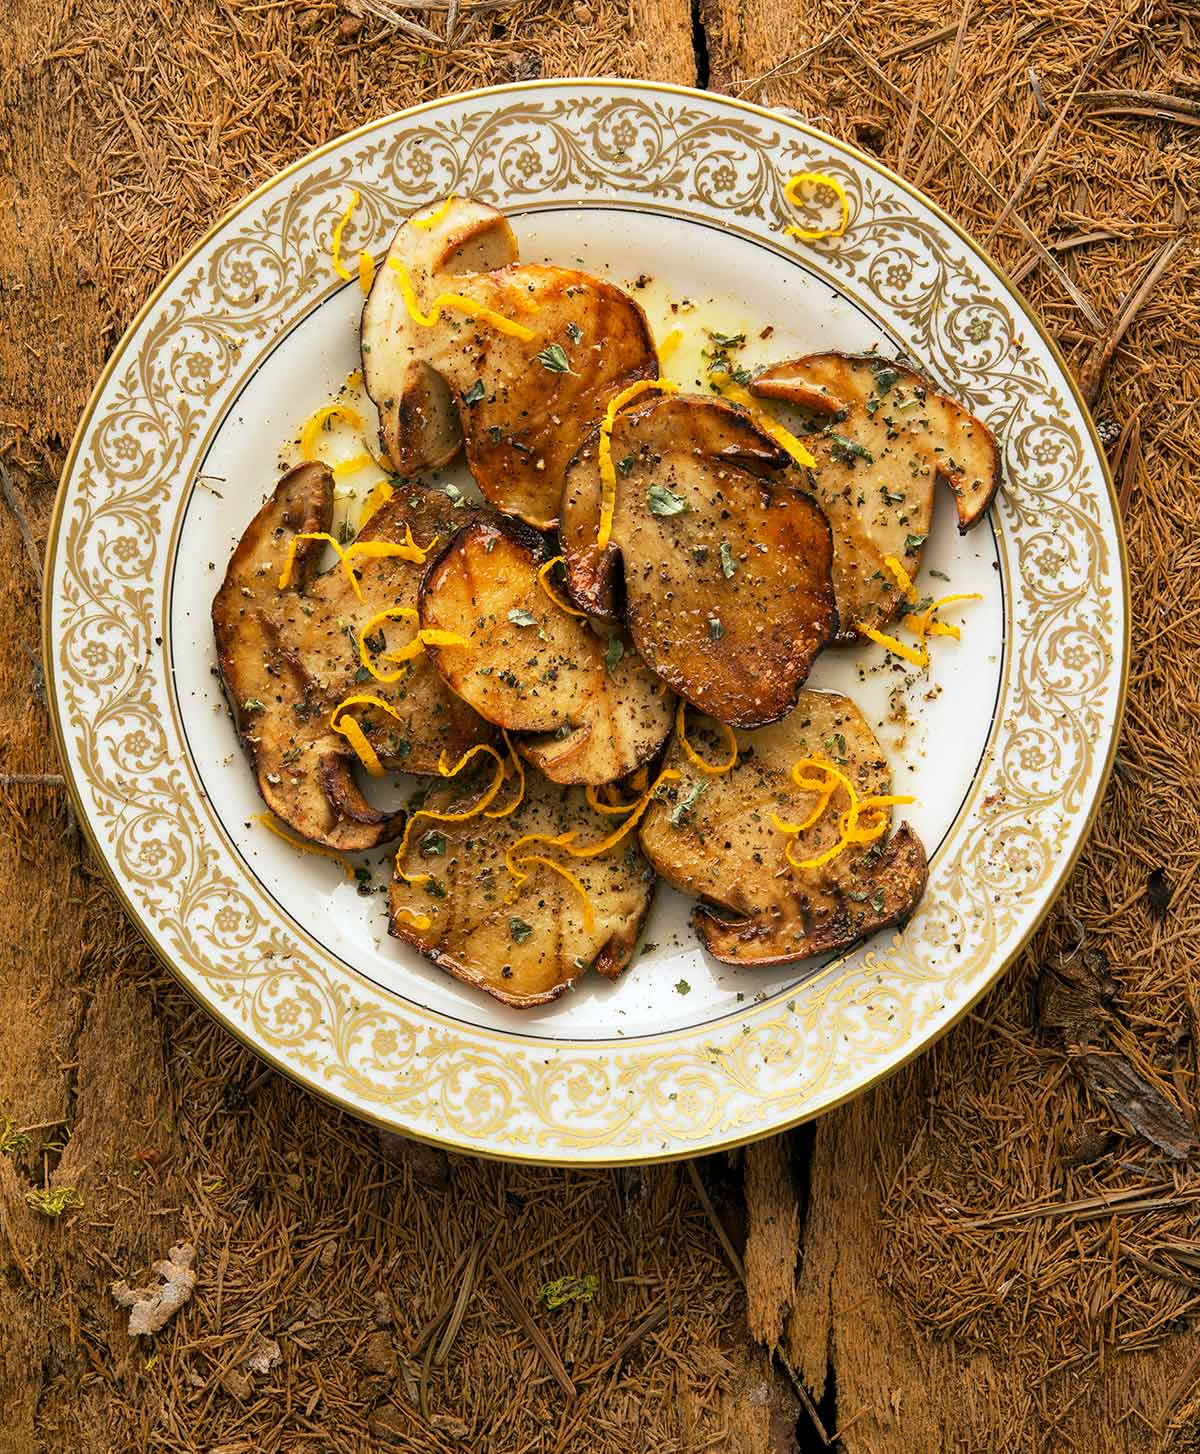 Grilled mushrooms on a plate